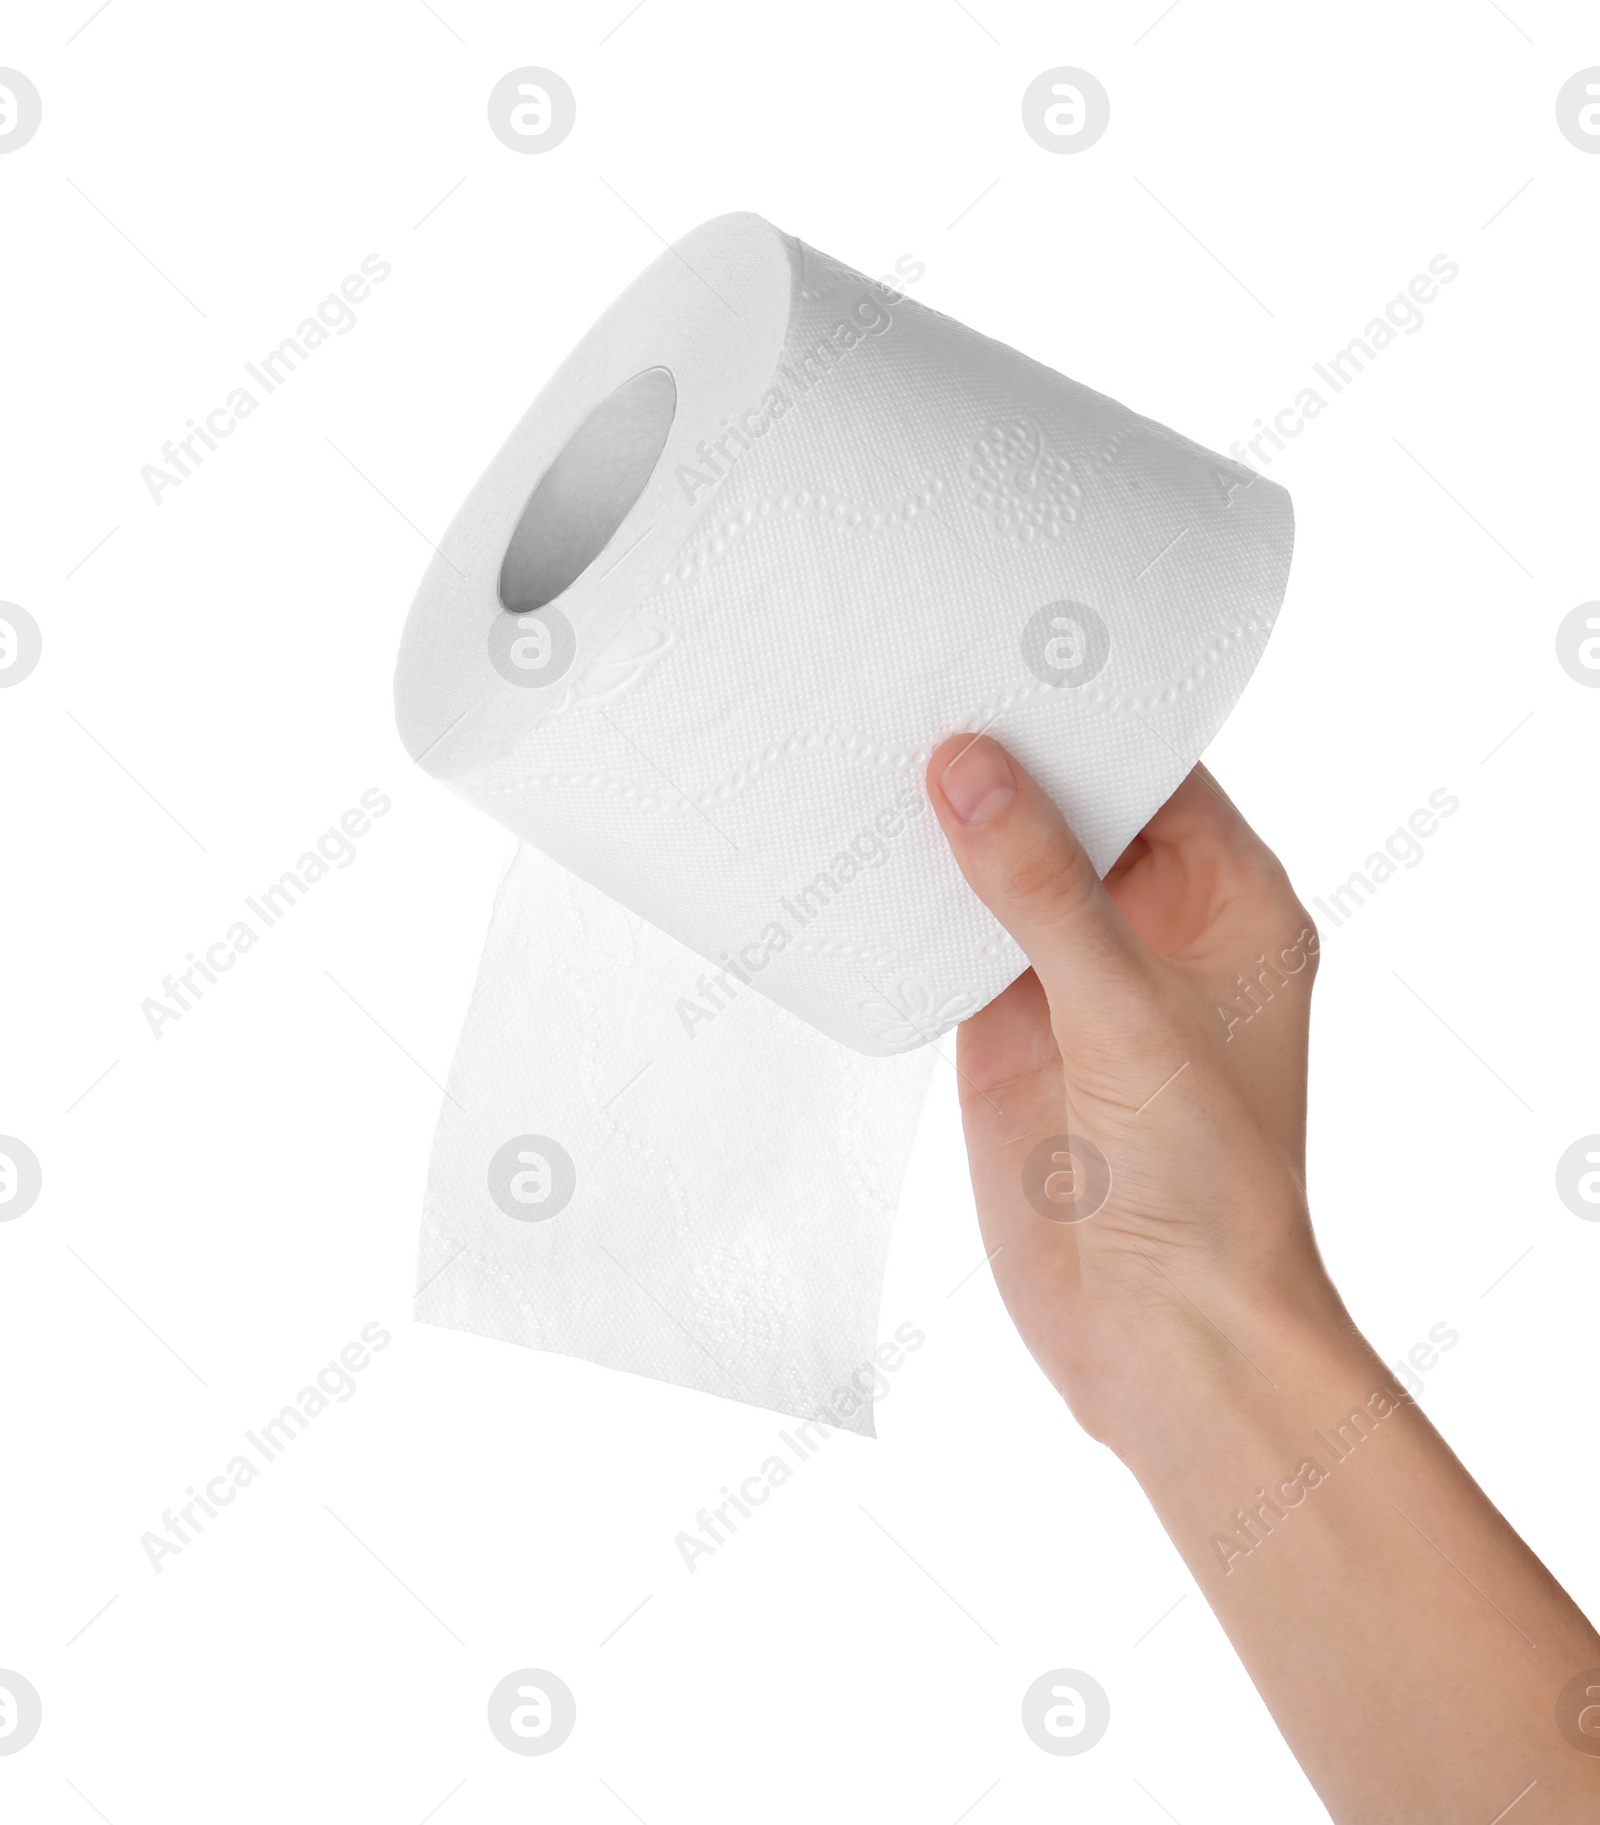 Photo of Woman holding toilet paper roll on white background. Personal hygiene